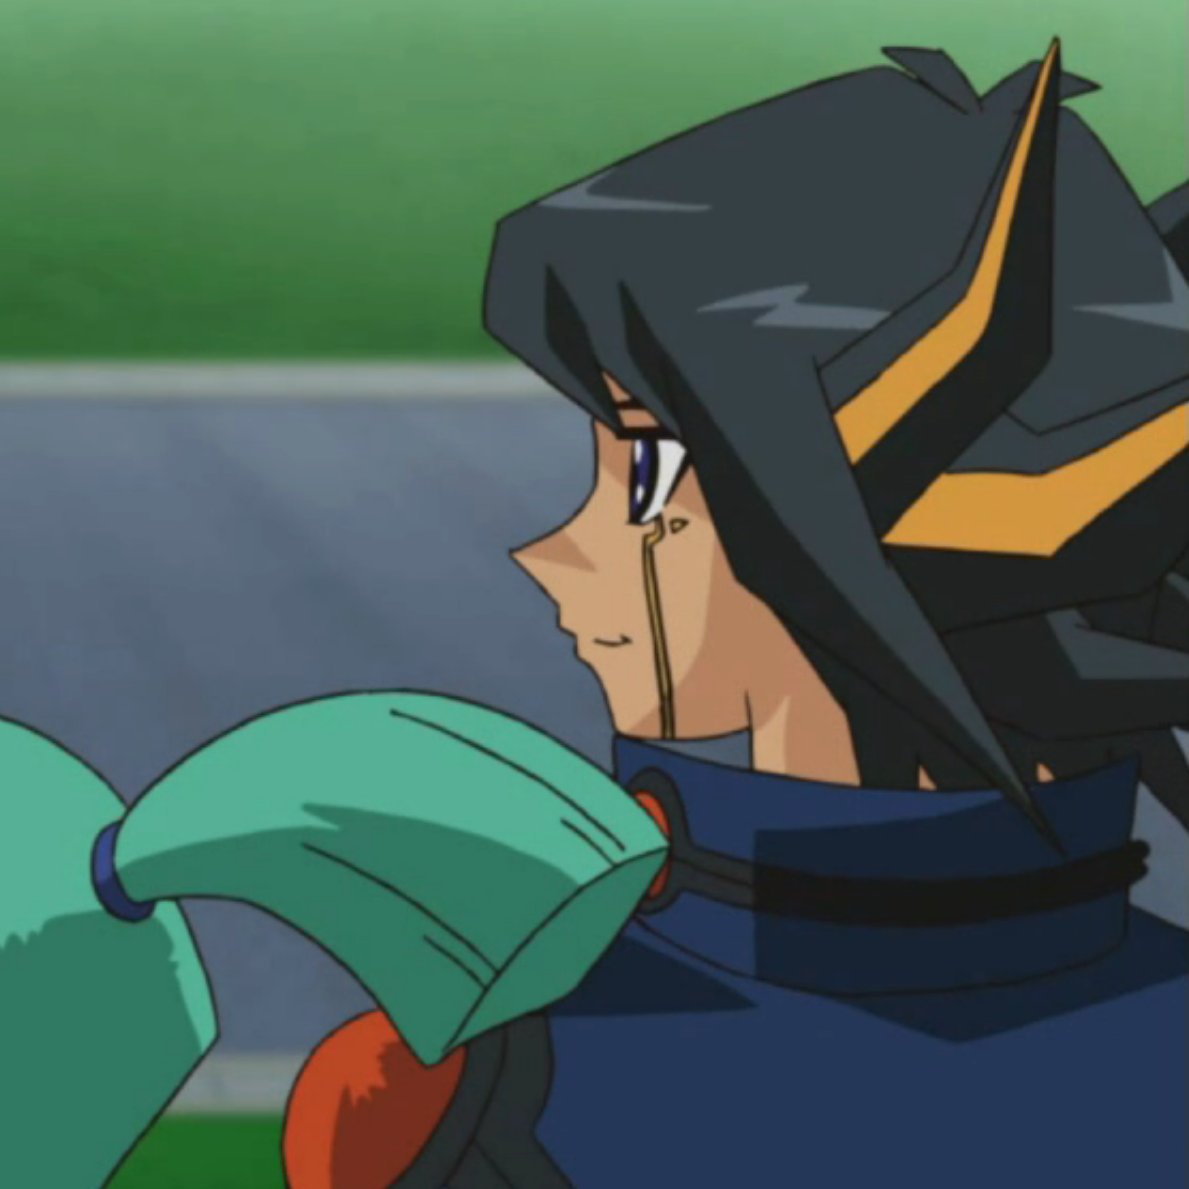 Yusei smiling while Aki is holding onto him vs the way he smiles watching her ride around for her license is just so heartwarming. He is such a stoic person, but so smiley when it comes to Aki. 

Yusei loves her very much :')